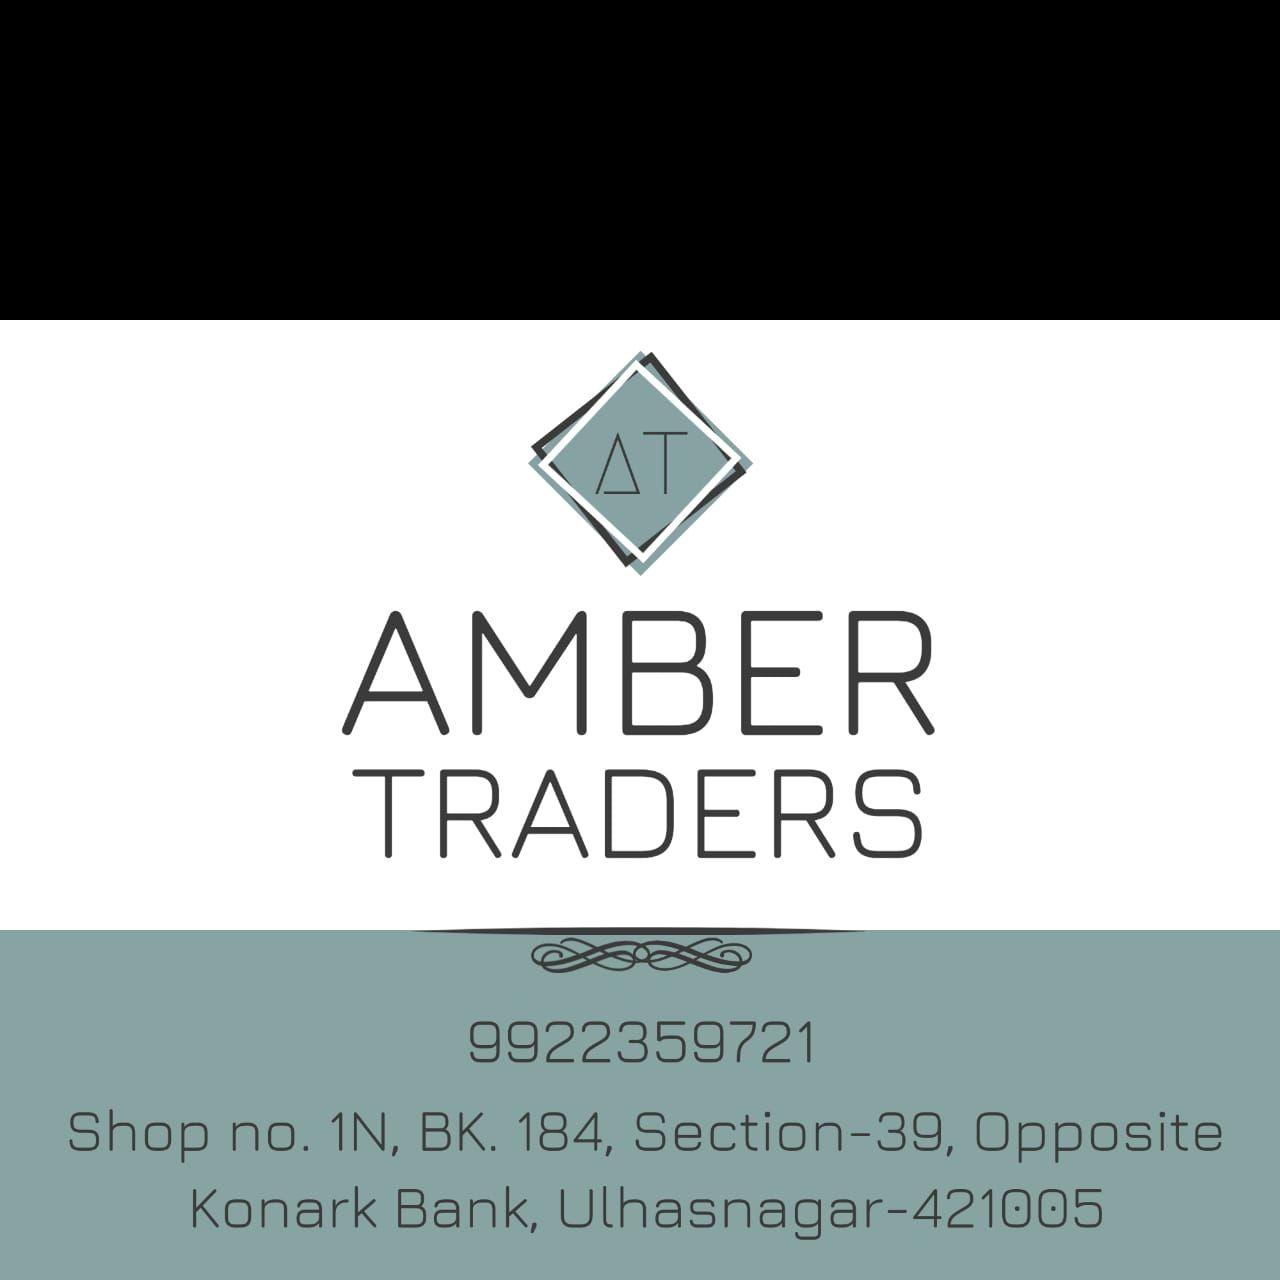 AMBER TRADERS